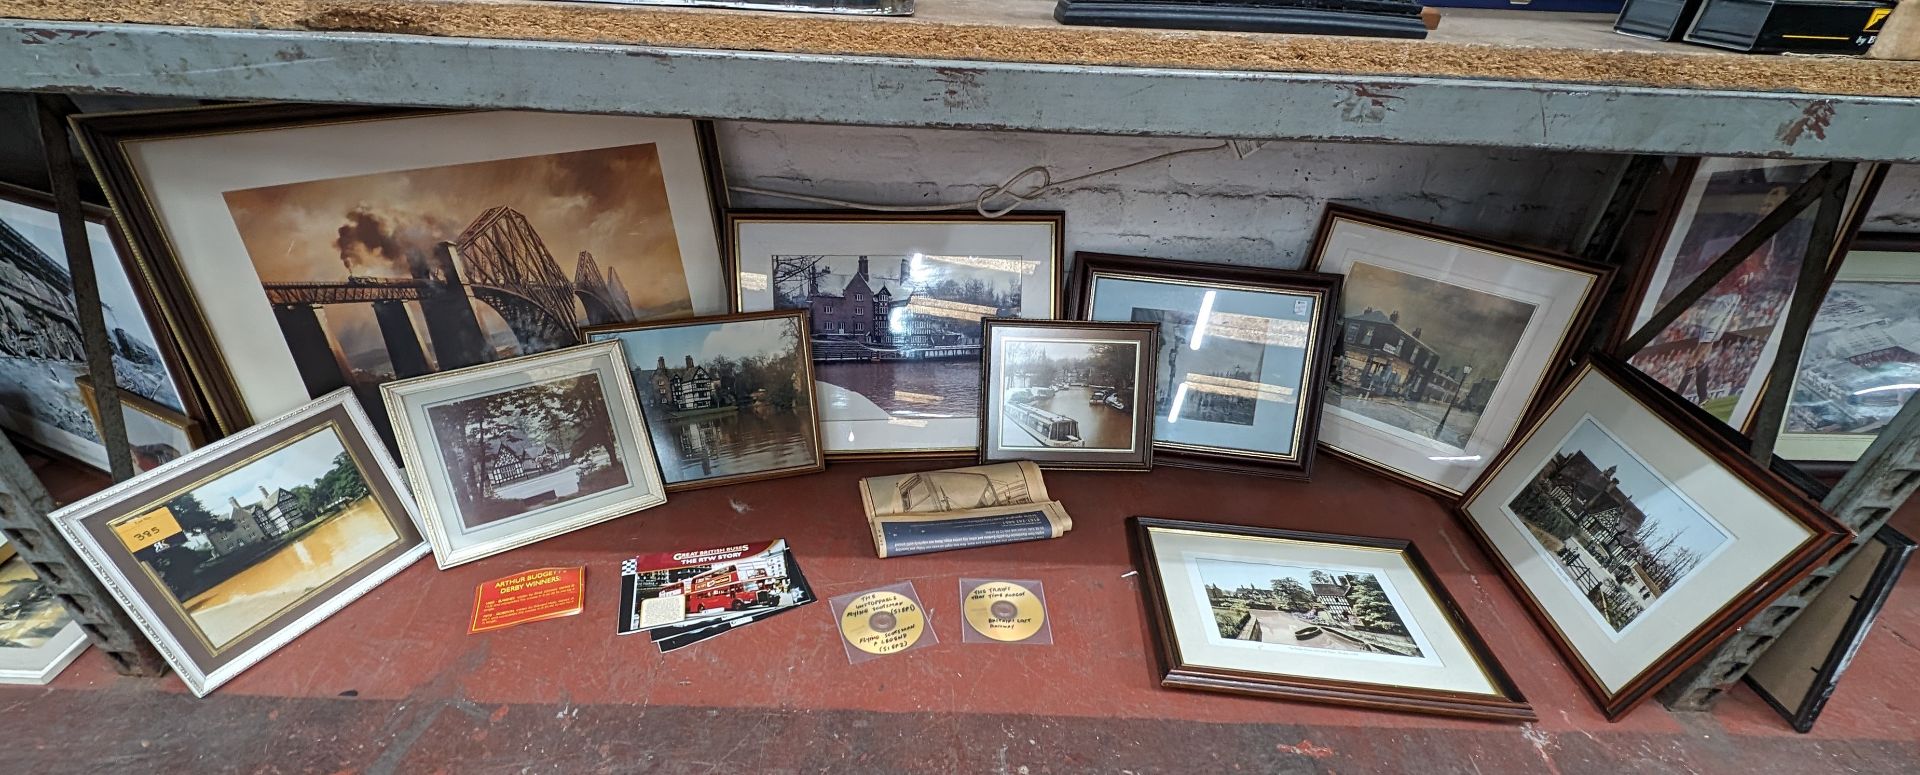 The contents of a bay of scenic photographs & other items - 10 framed items plus quantity of assorte